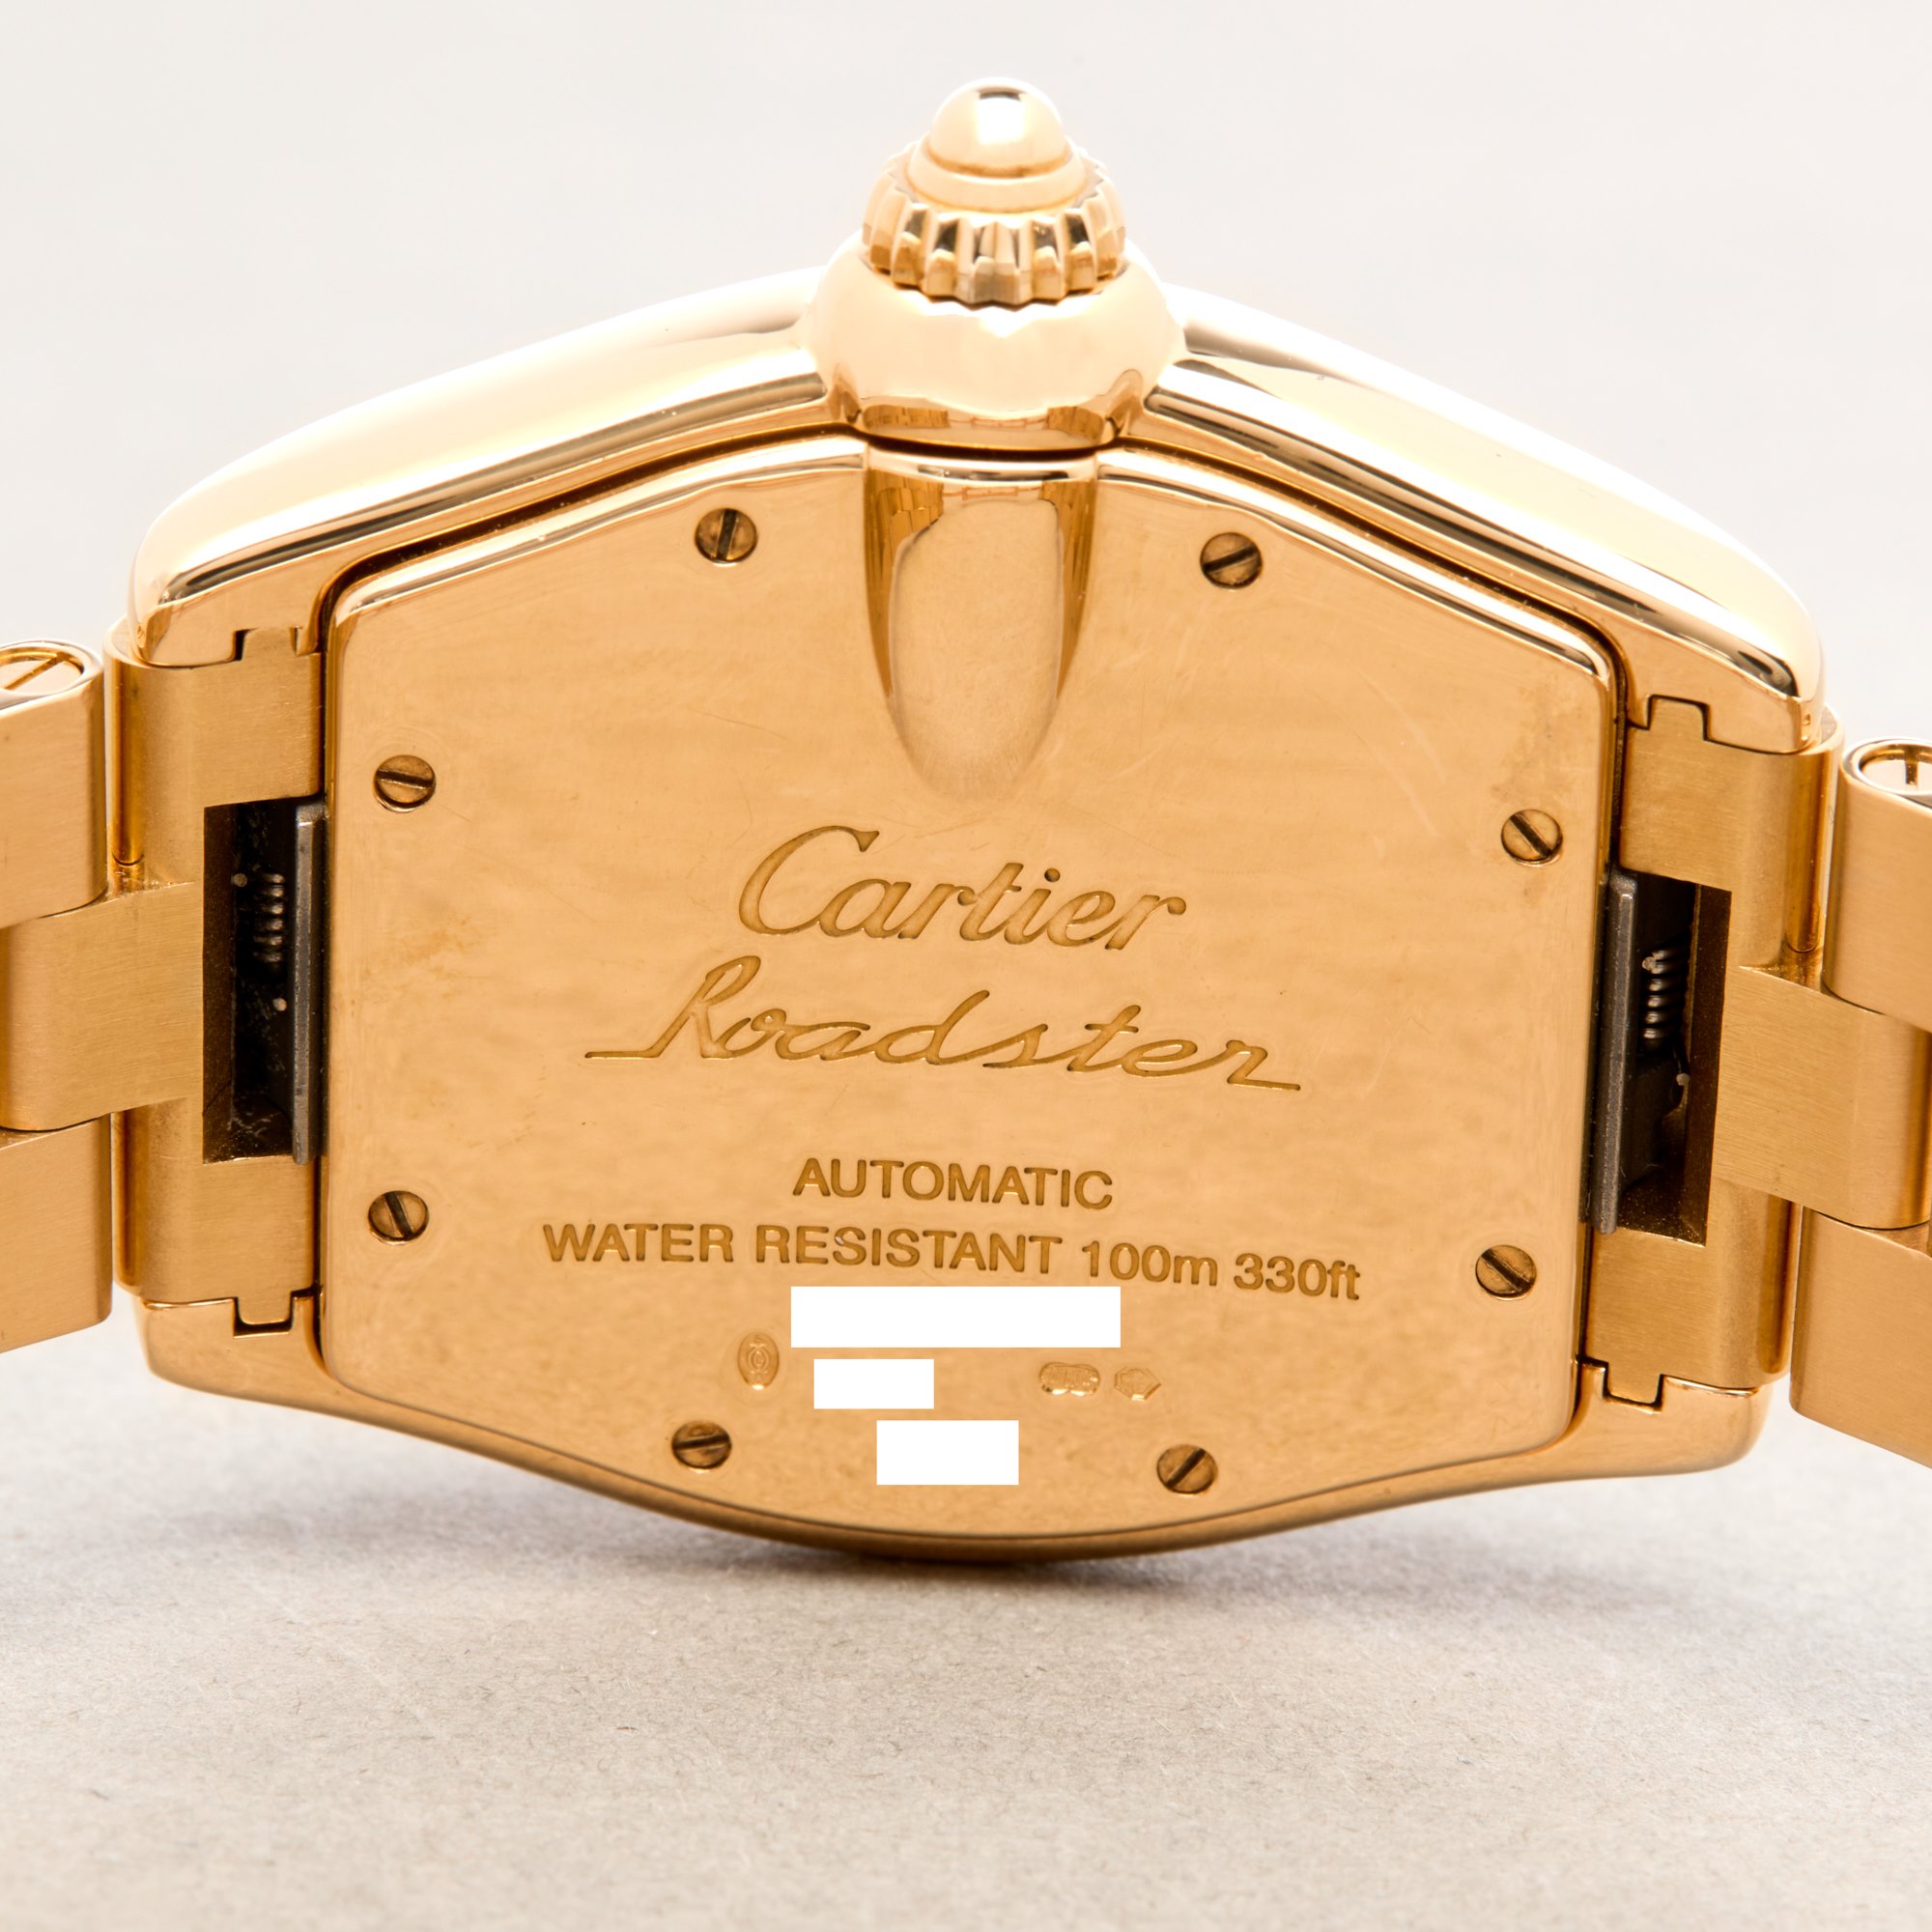 Cartier Roadster 18K Yellow Gold W62005V1 or 2524